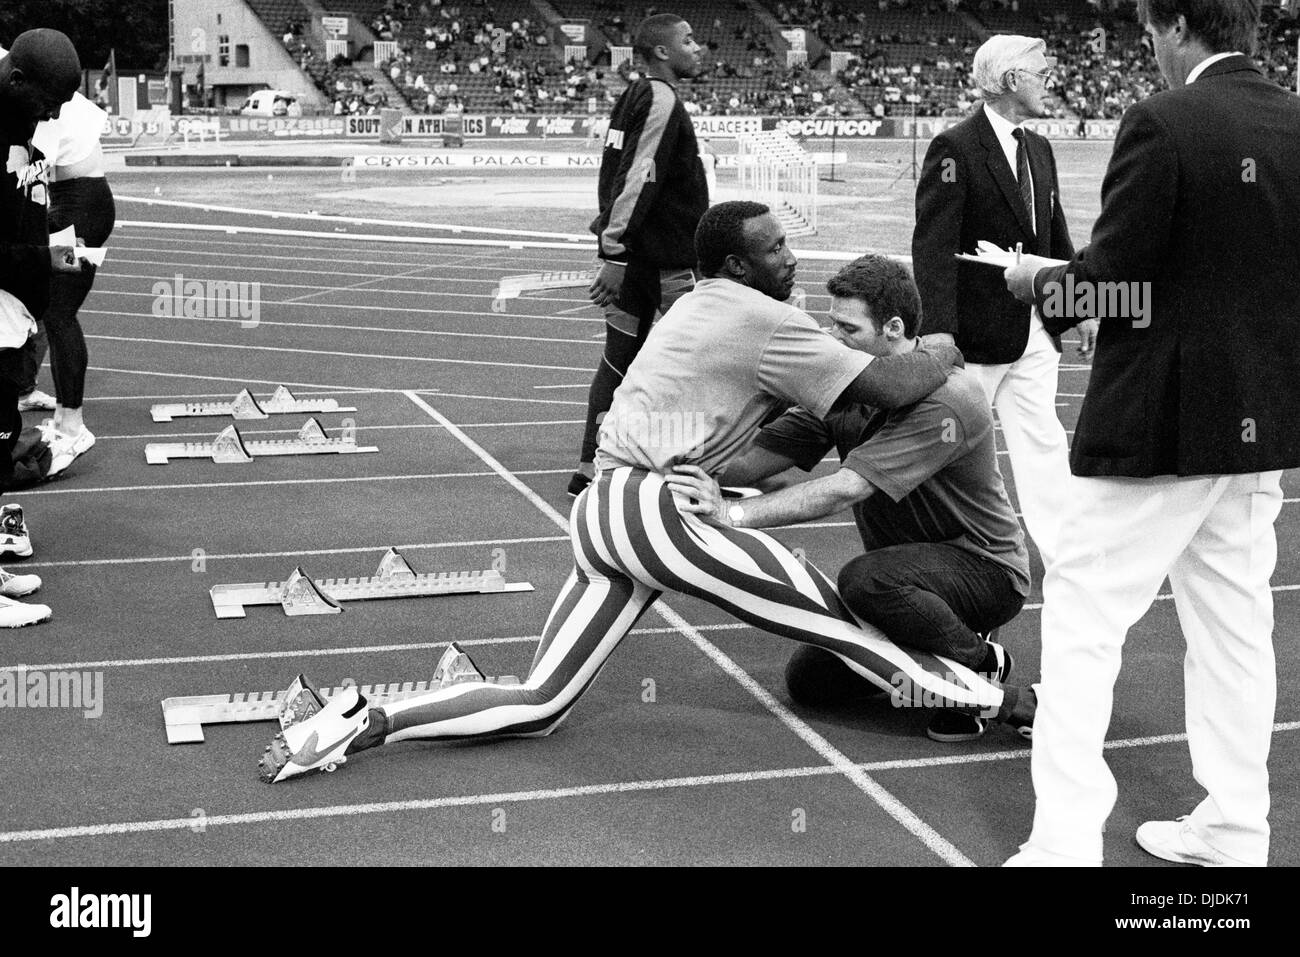 British 100m sprinter Linford Christie competing at the Securicor Games at Crystal Palace, London in 1996 Stock Photo